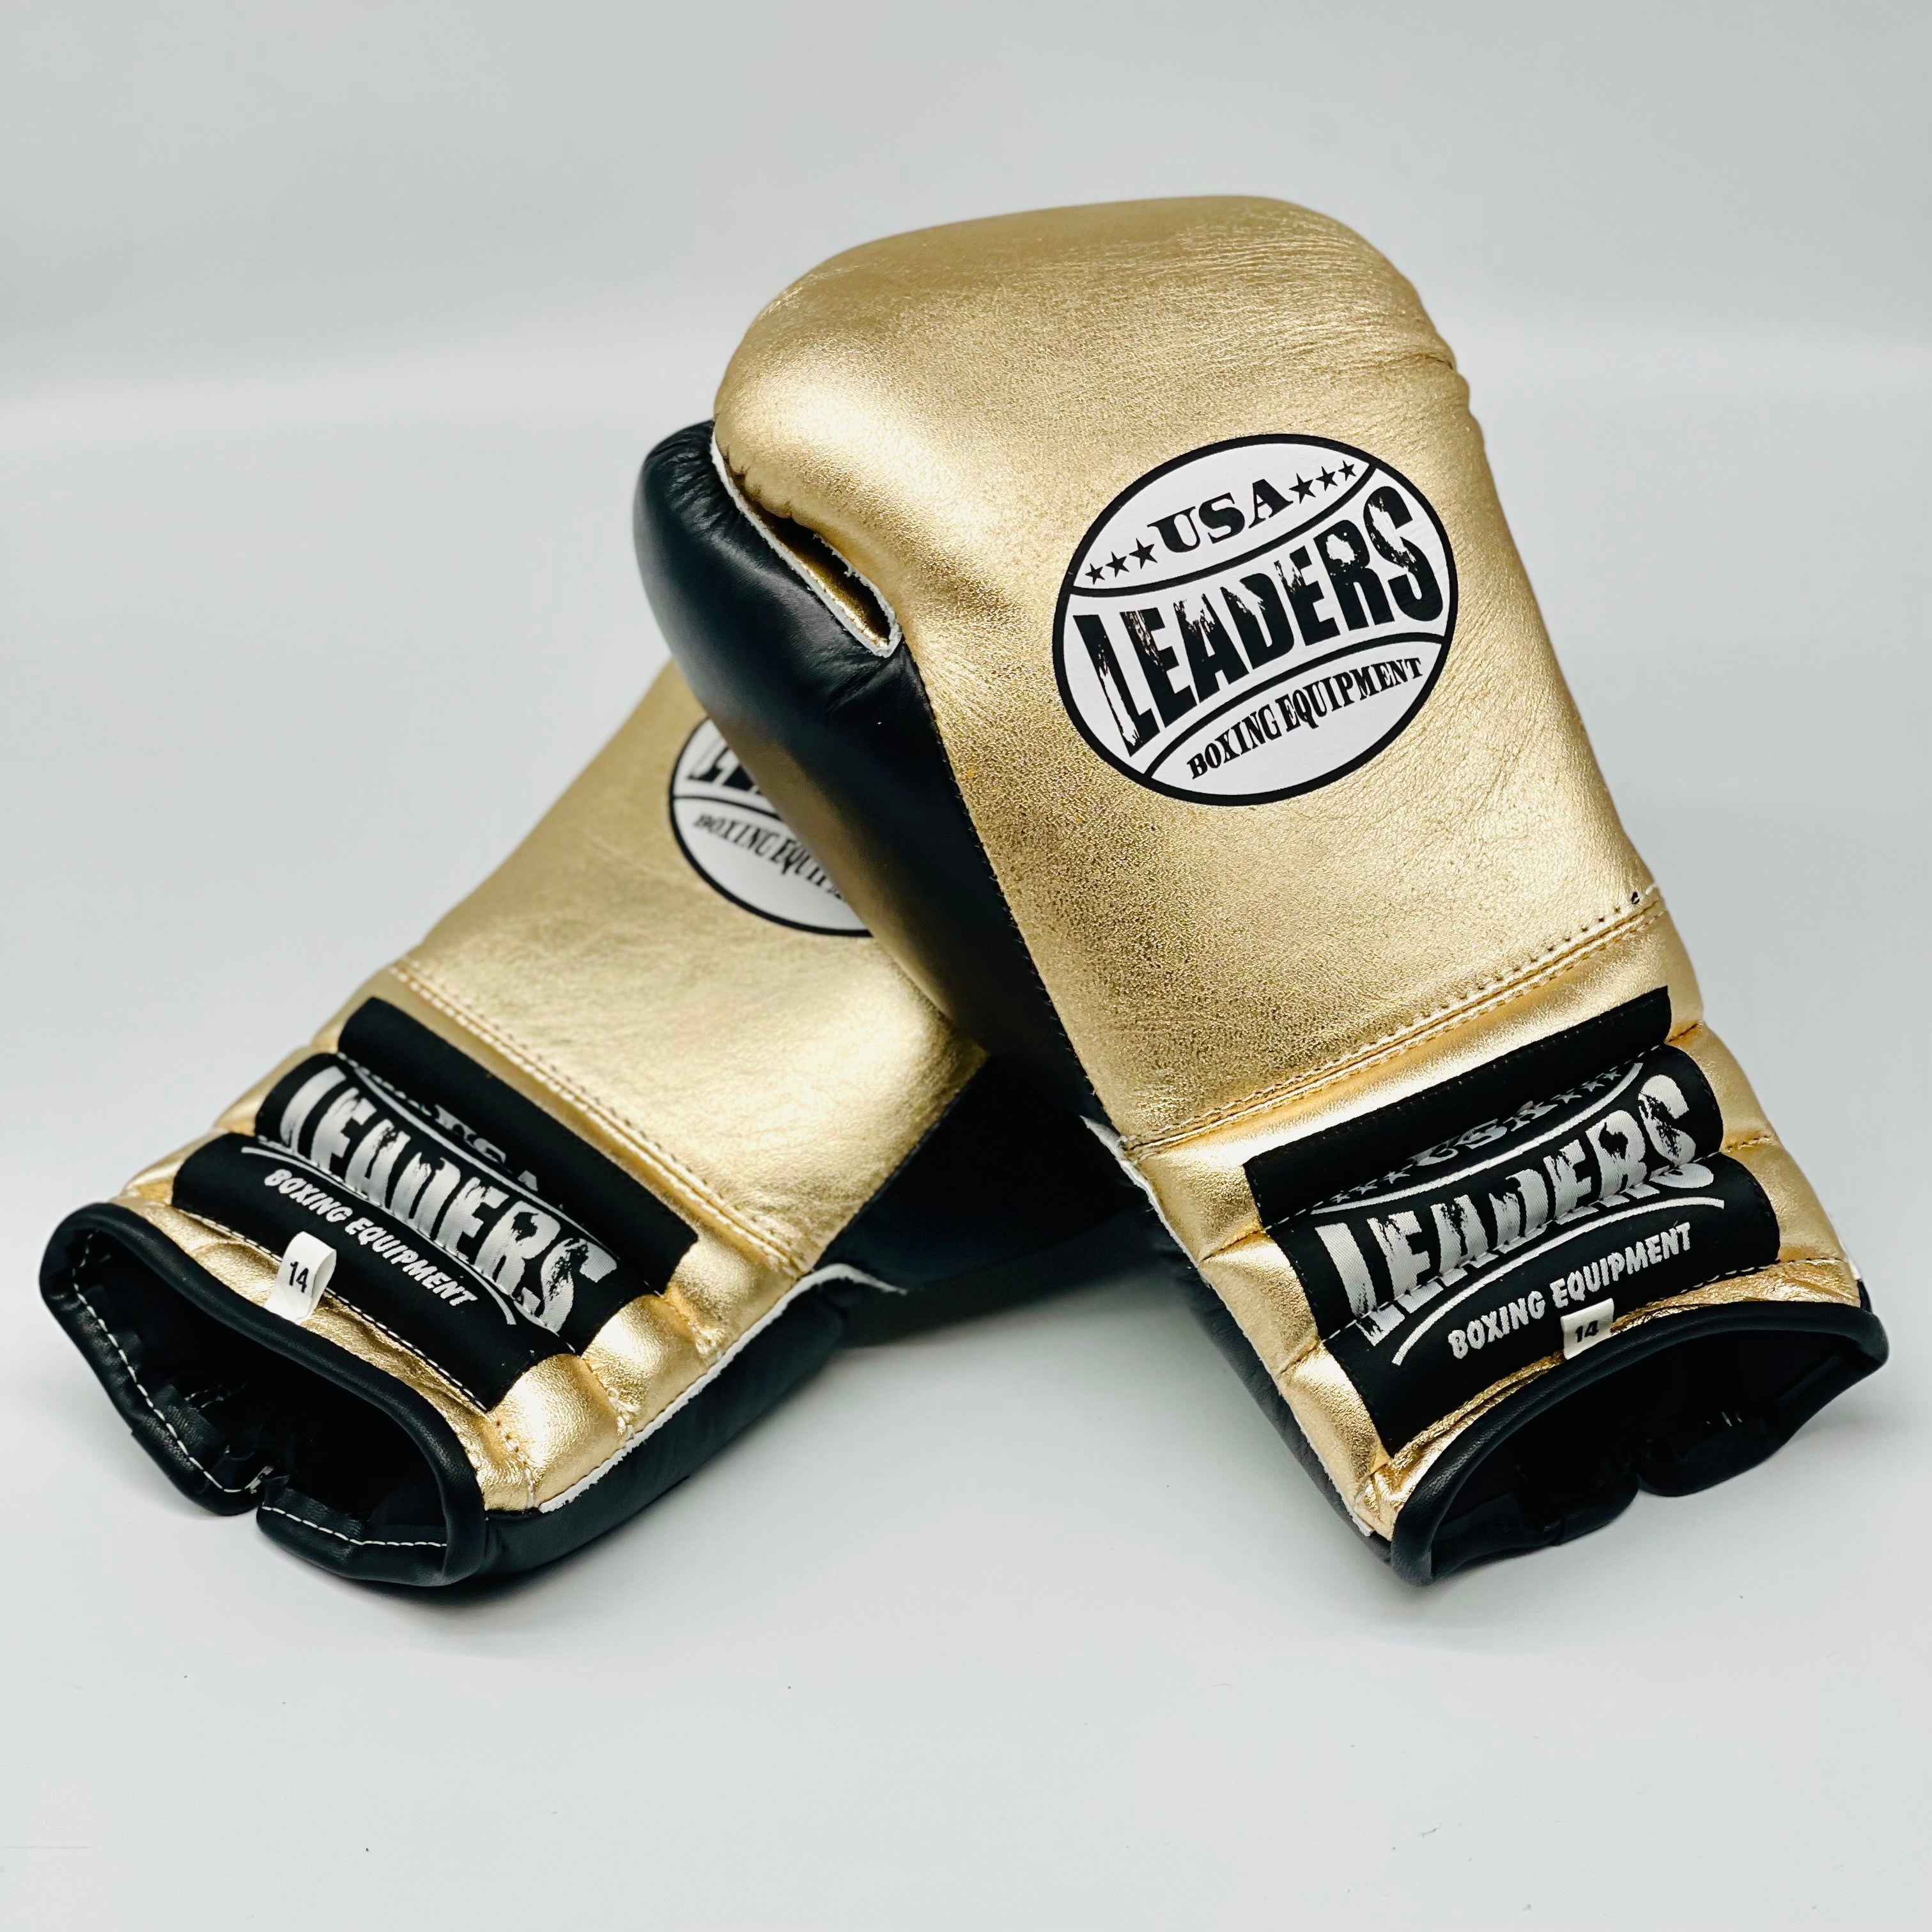 SuperLEAD MEX  Boxing Gloves LACED (Gold / Black)